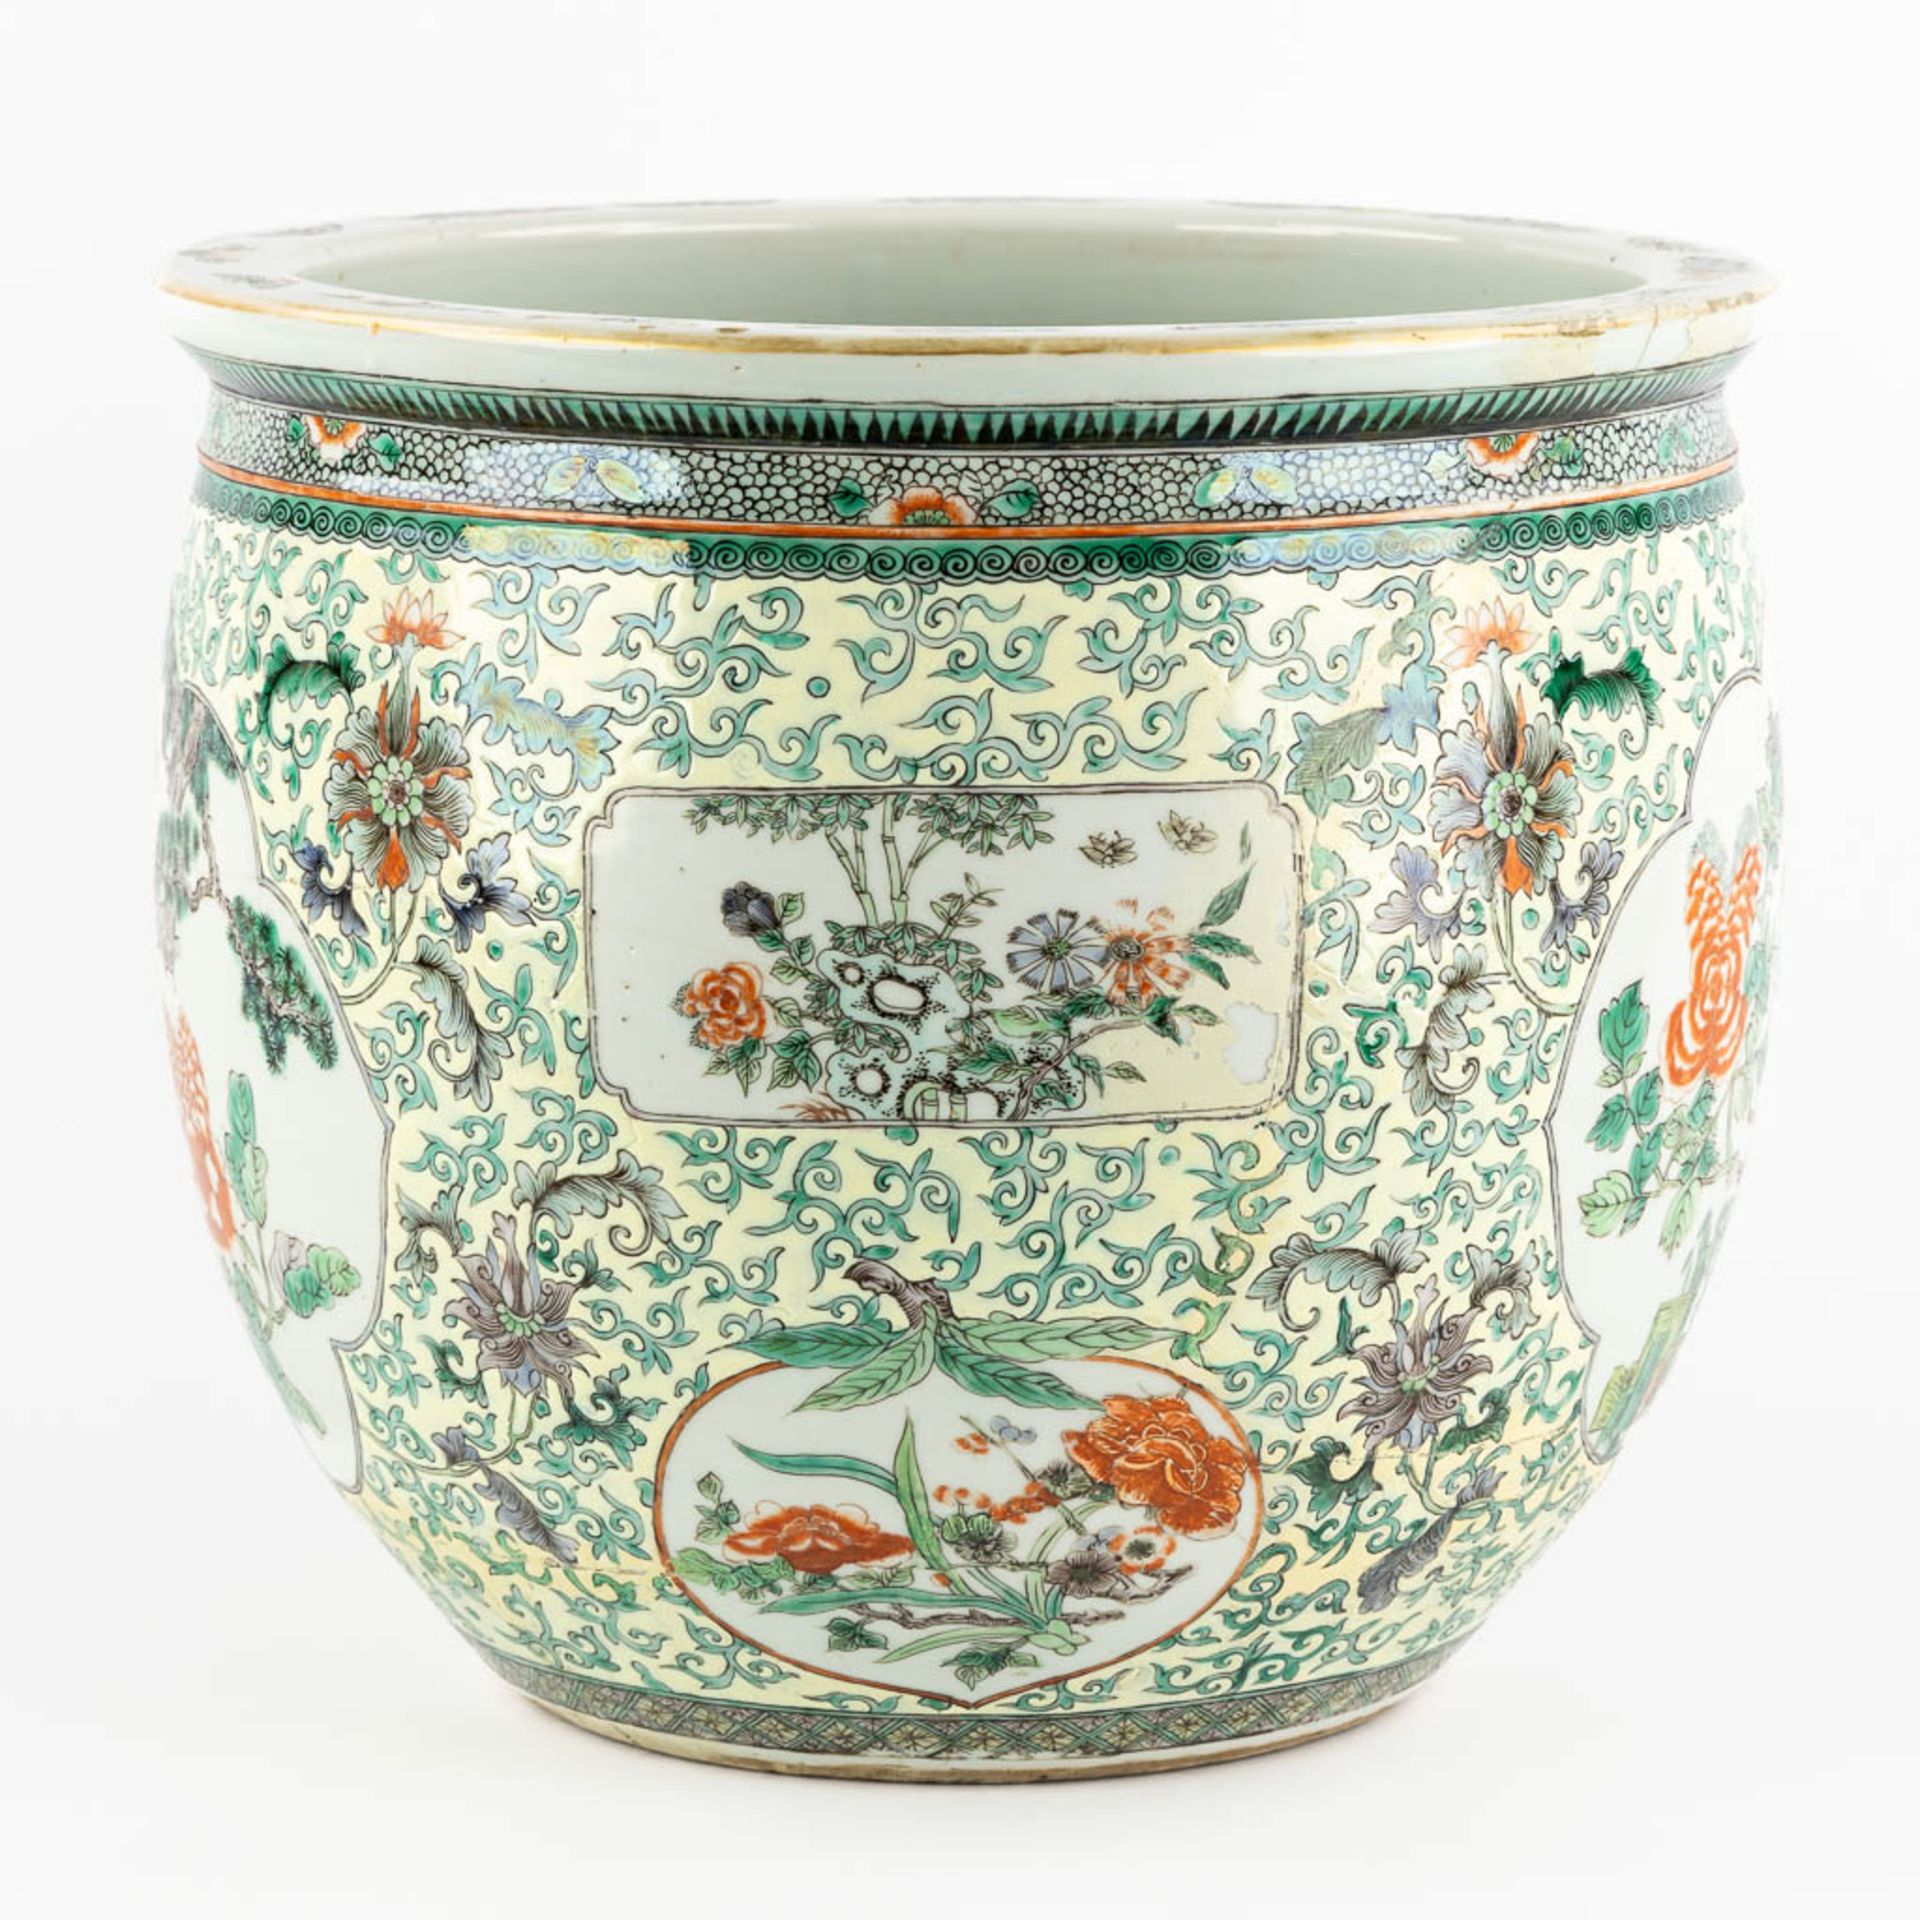 A Large Chinese Cache-Pot, Famille Verte decorated with fauna and flora. 19th C. (H:35 x D:40 cm) - Image 7 of 14